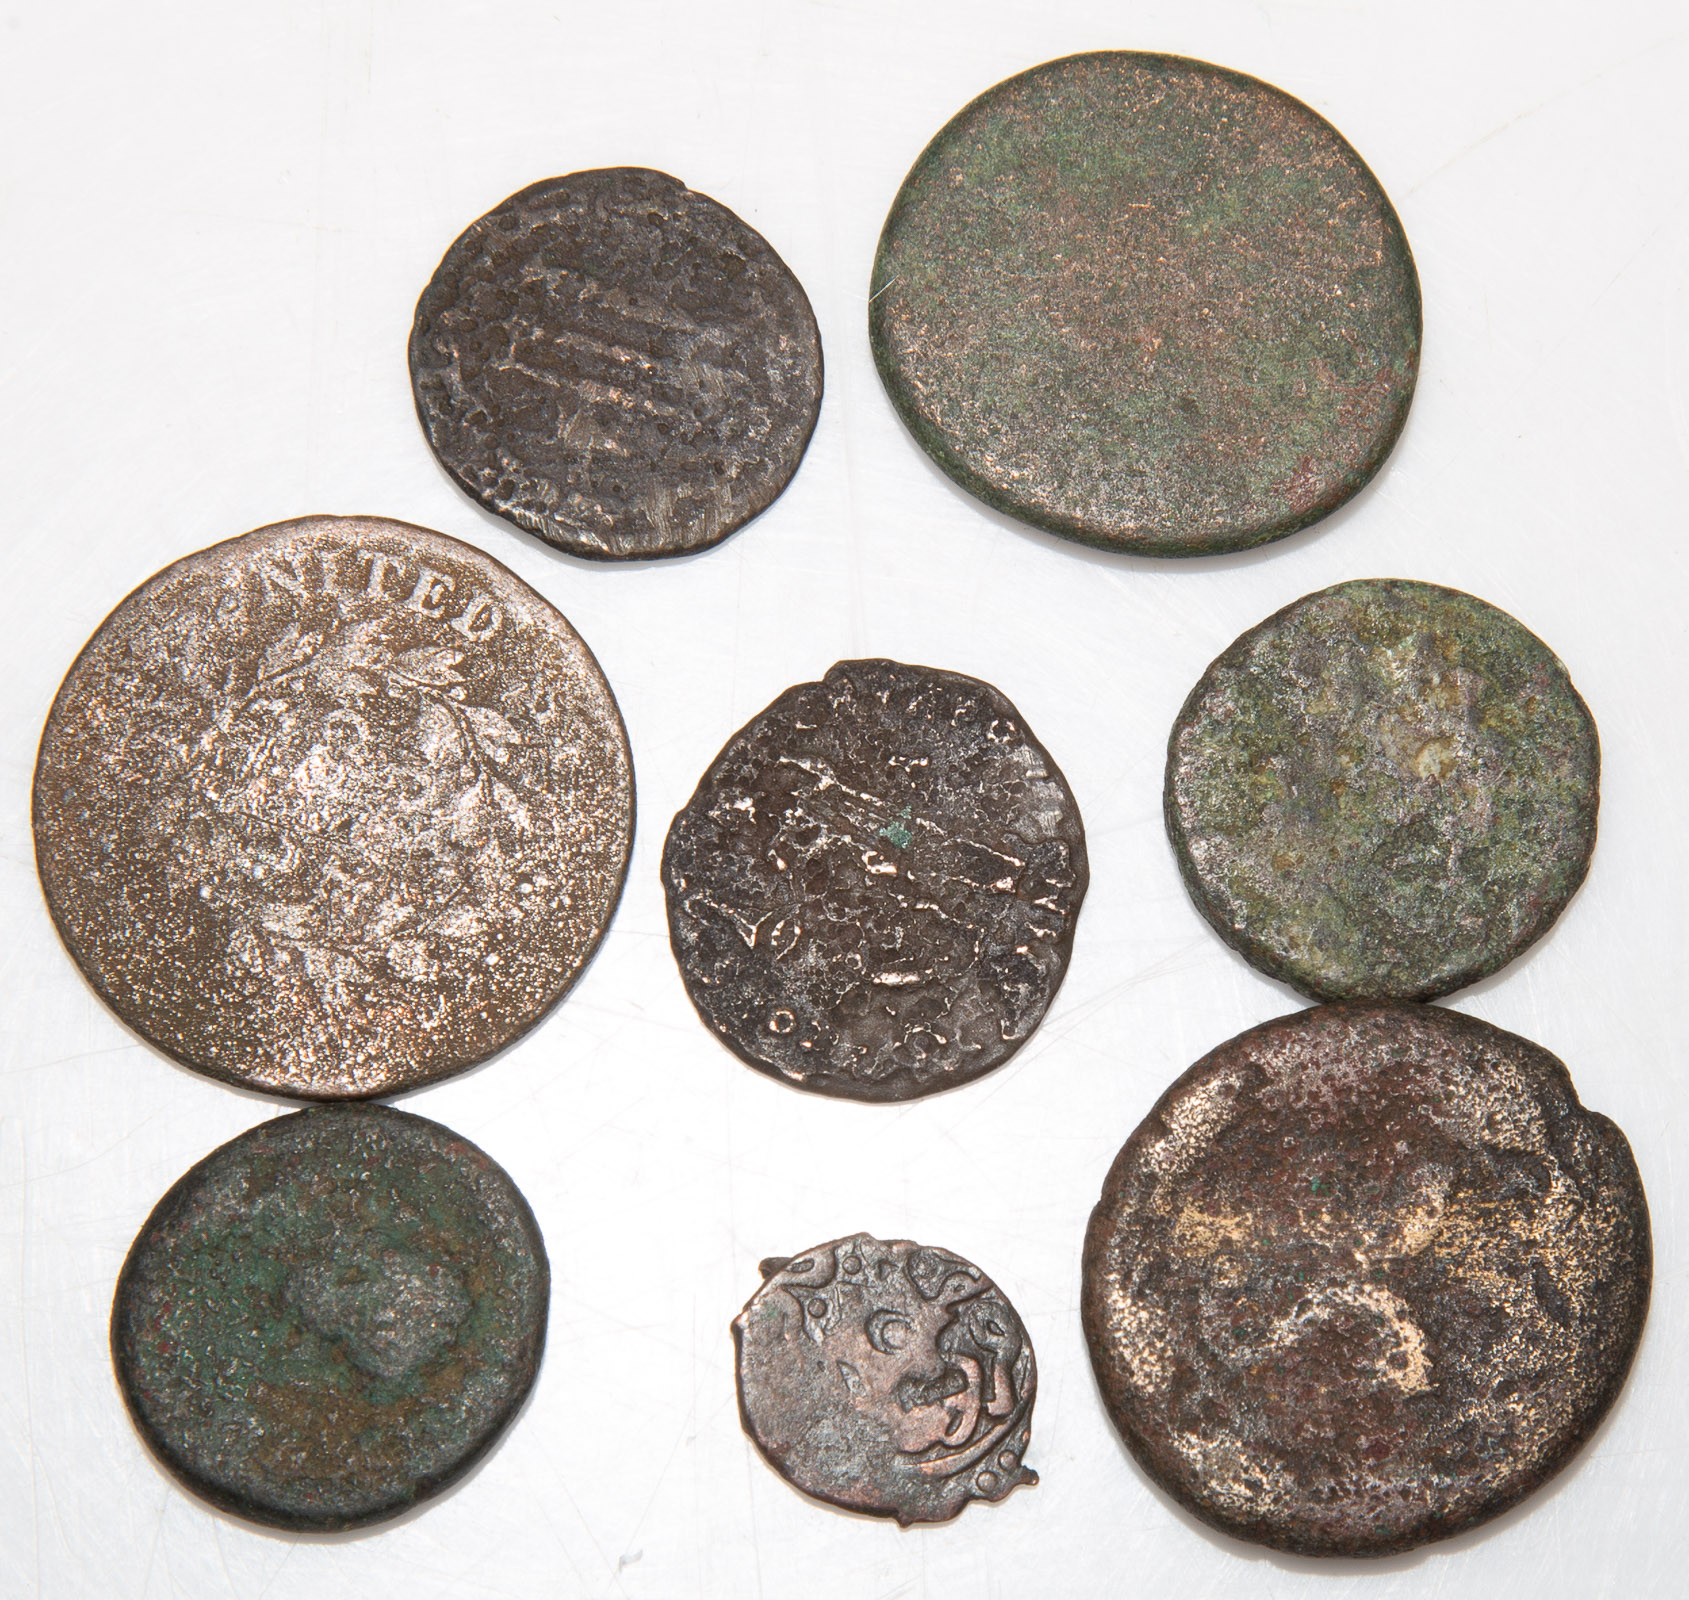 SMALL GROUP OF ROMAN BRONZE COINS 7